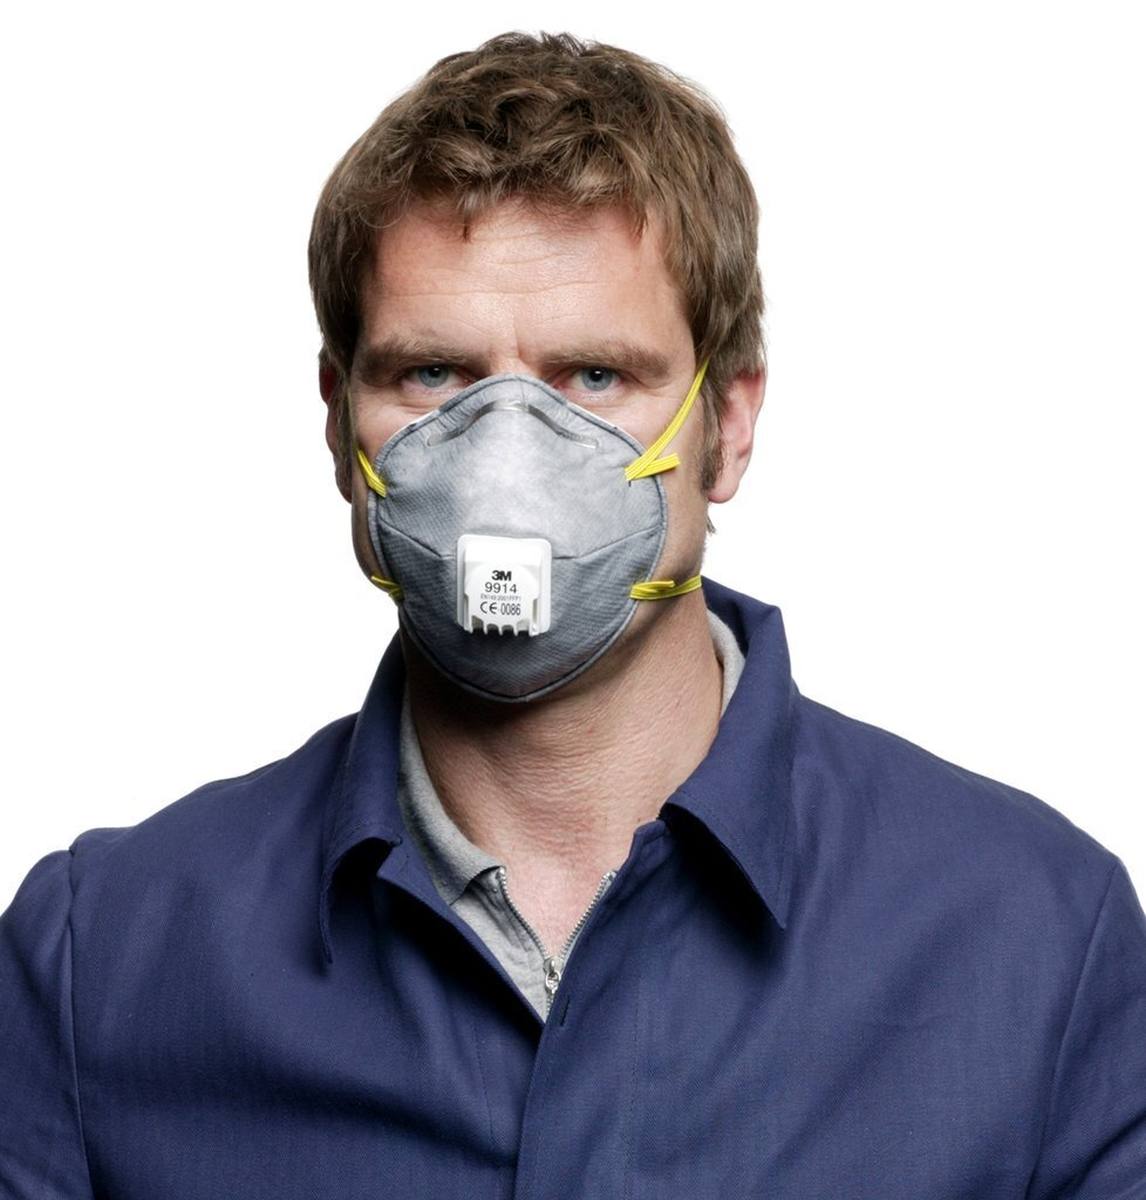 3M 9914 Odor protection mask FFP1 with cool-flow exhalation valve, up to 4 times the limit value and against organic odors below the limit value